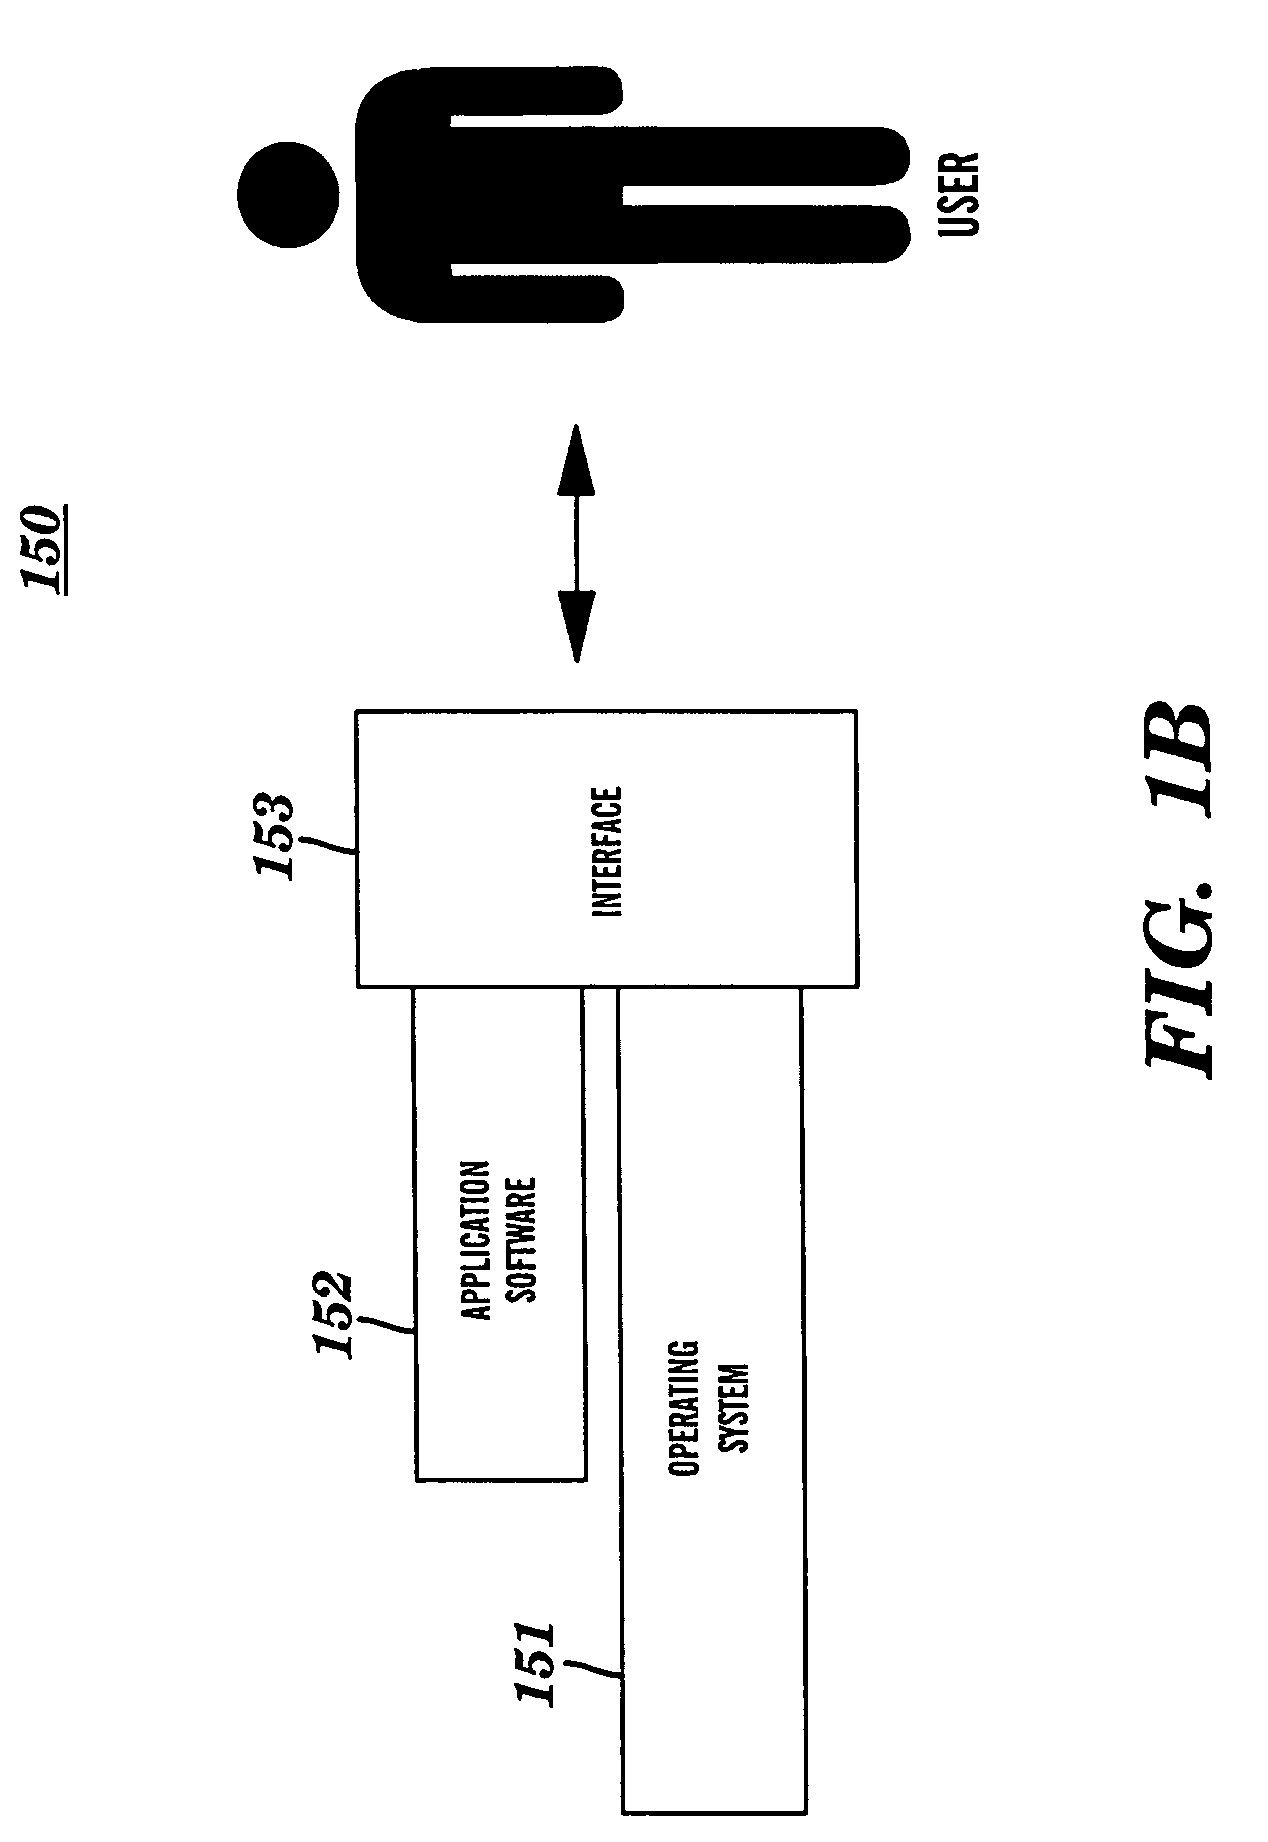 System and method for performing over time statistics in an electronic spreadsheet environment